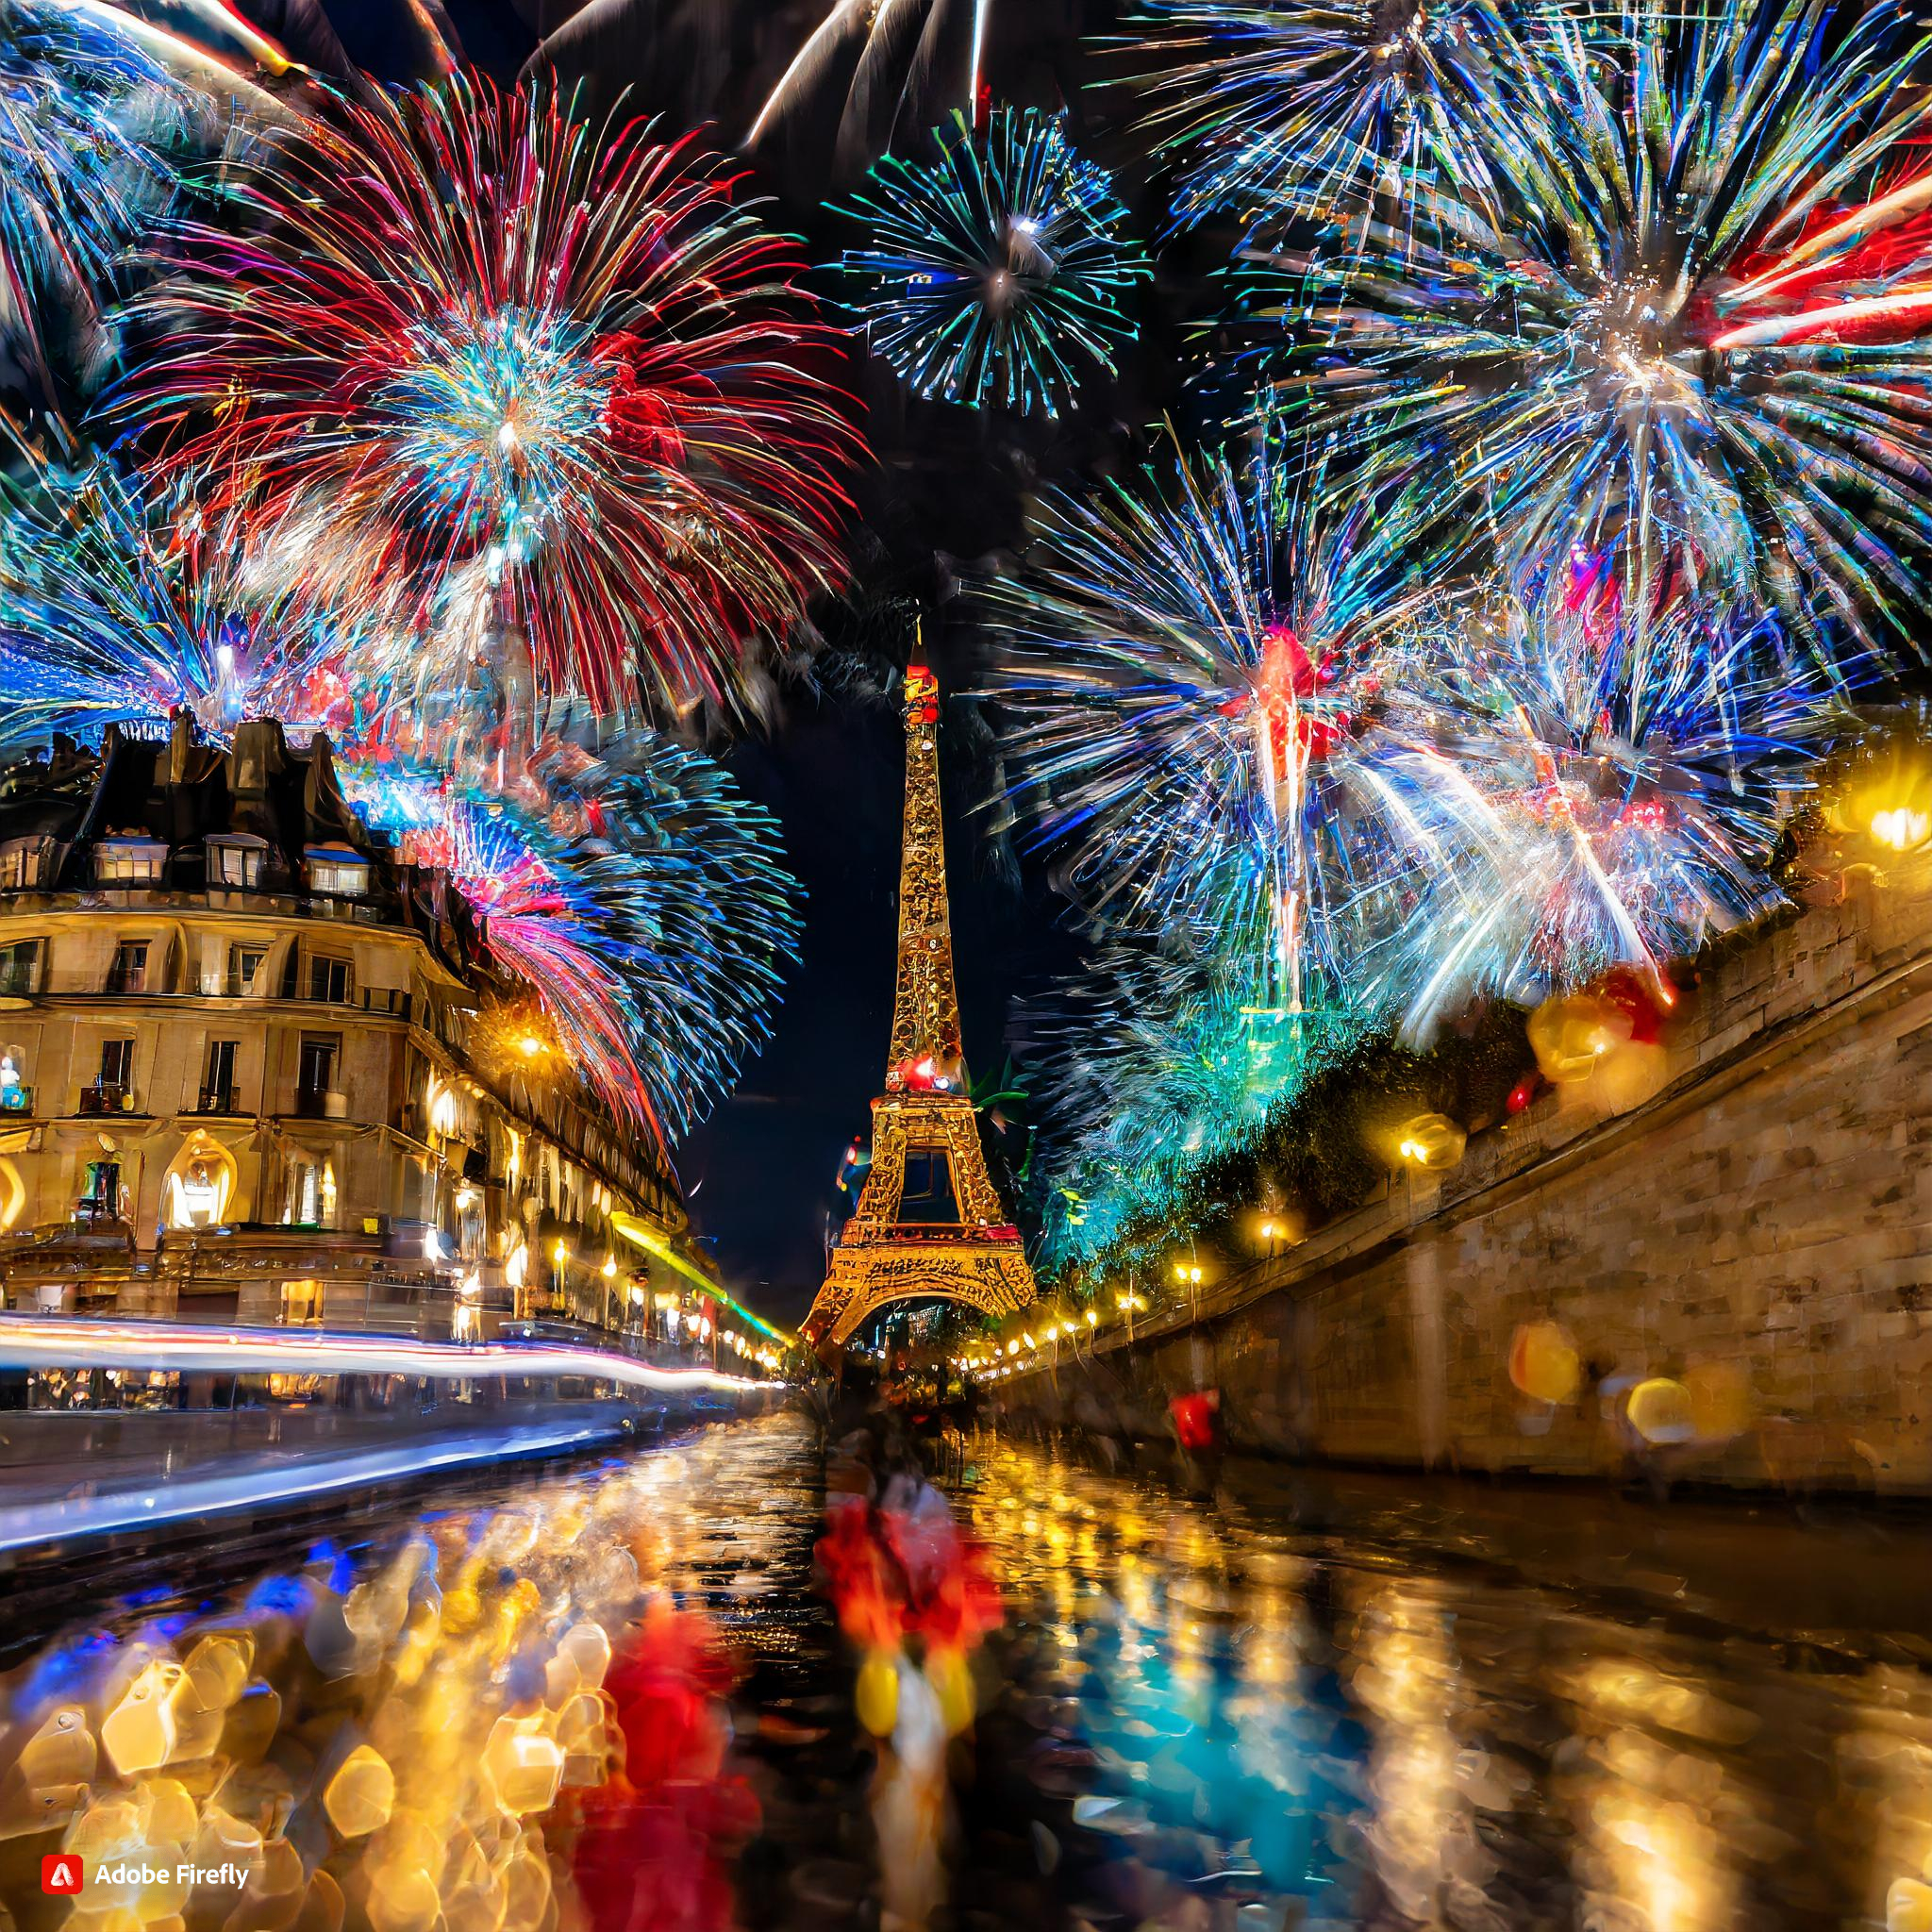  Firefly Paris, France. Eiffel tower during night time illuminated with disneyland fireworks in the b.jpg